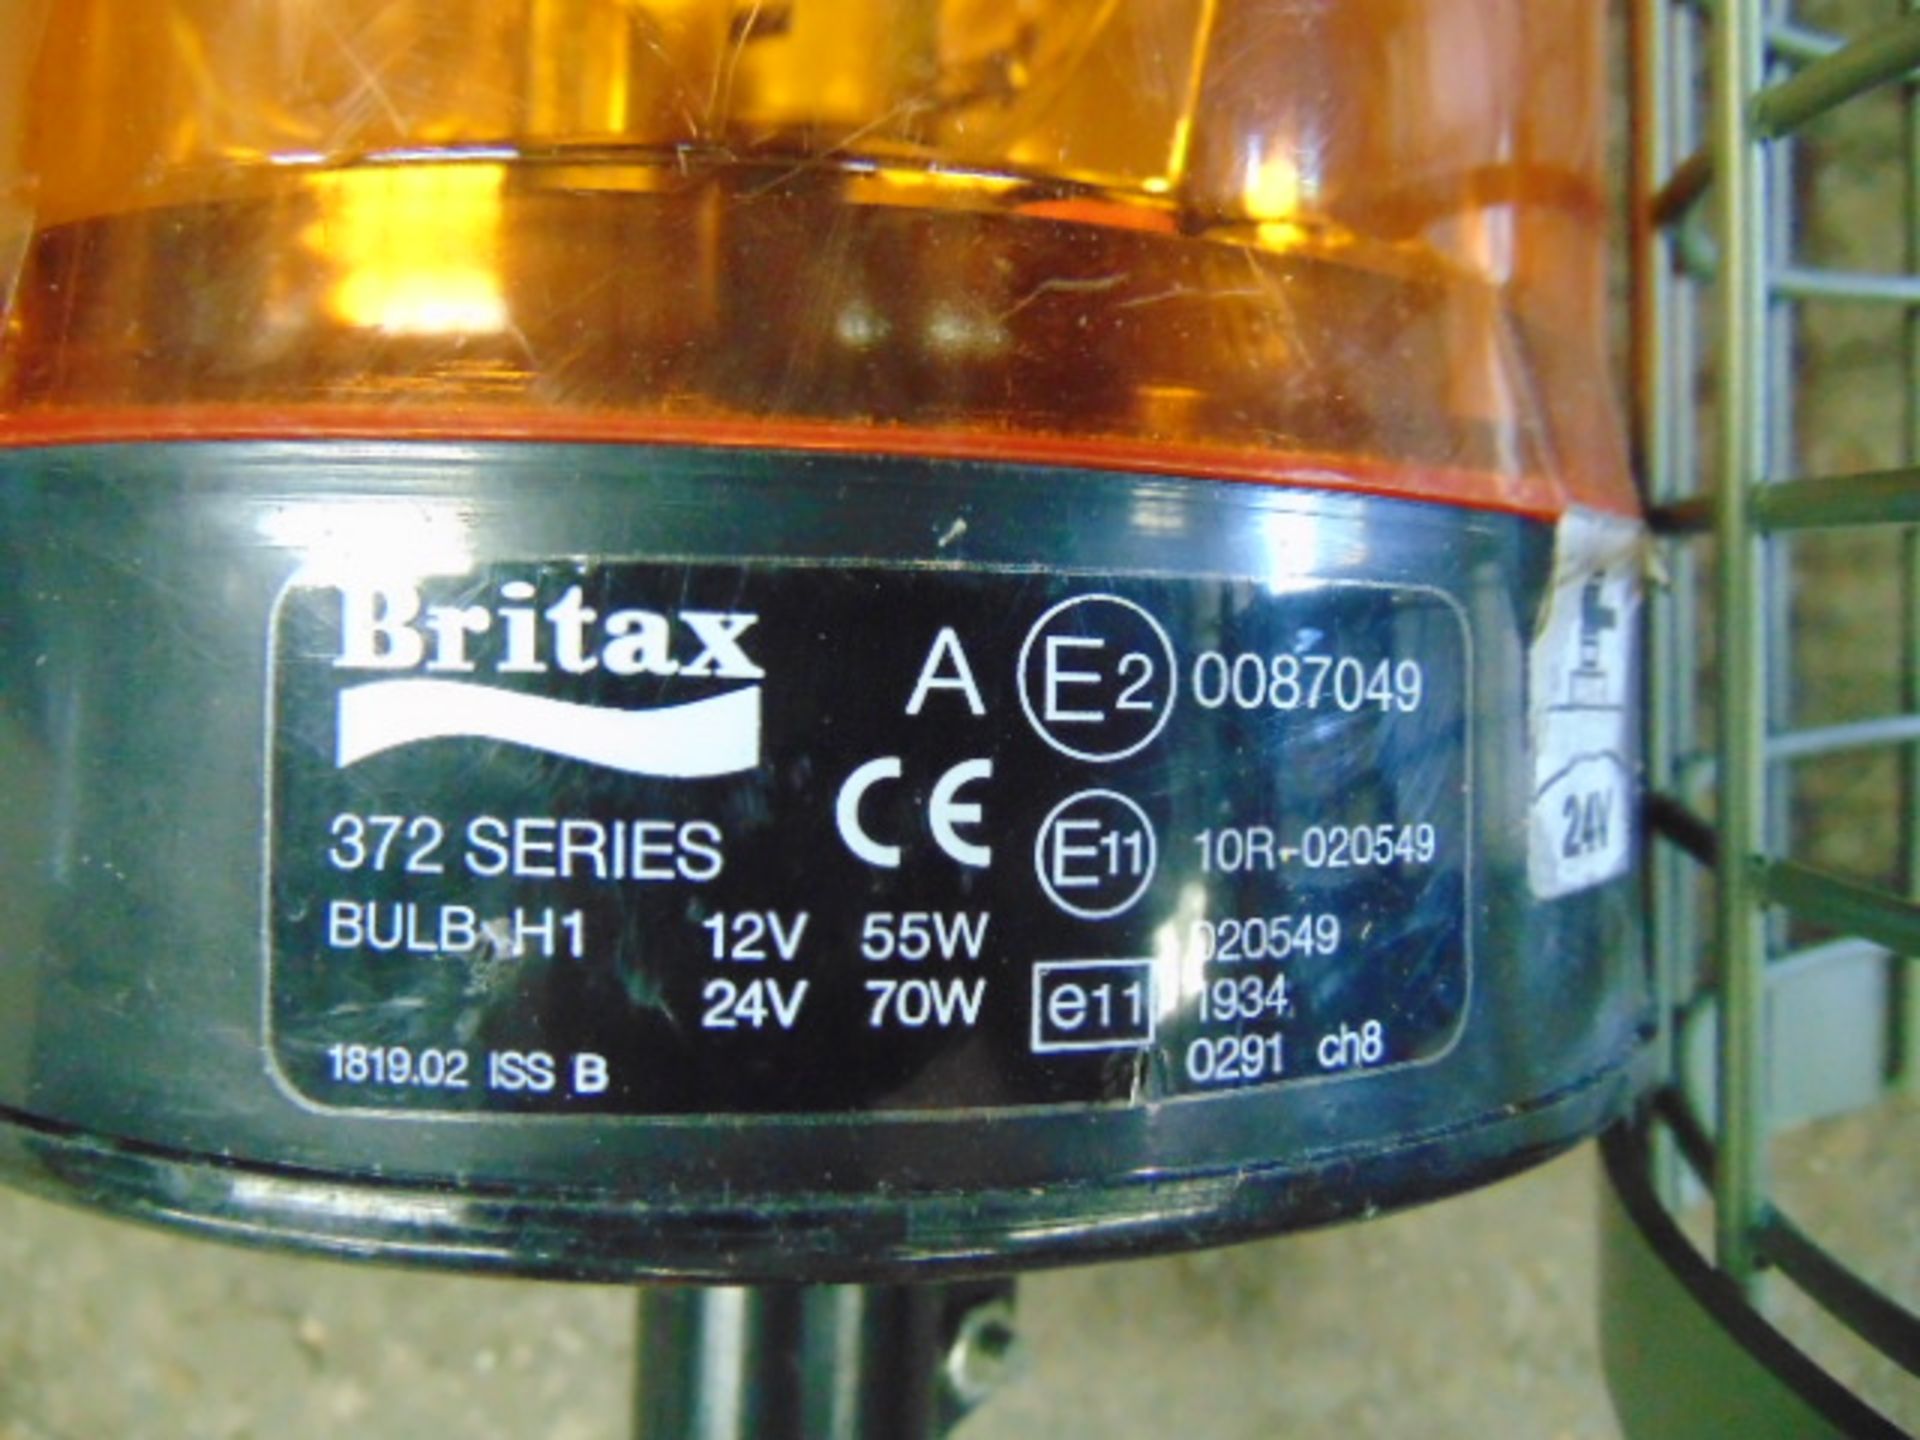 Britax Rotating Amber Beacon & Protective Cage - Image 3 of 4